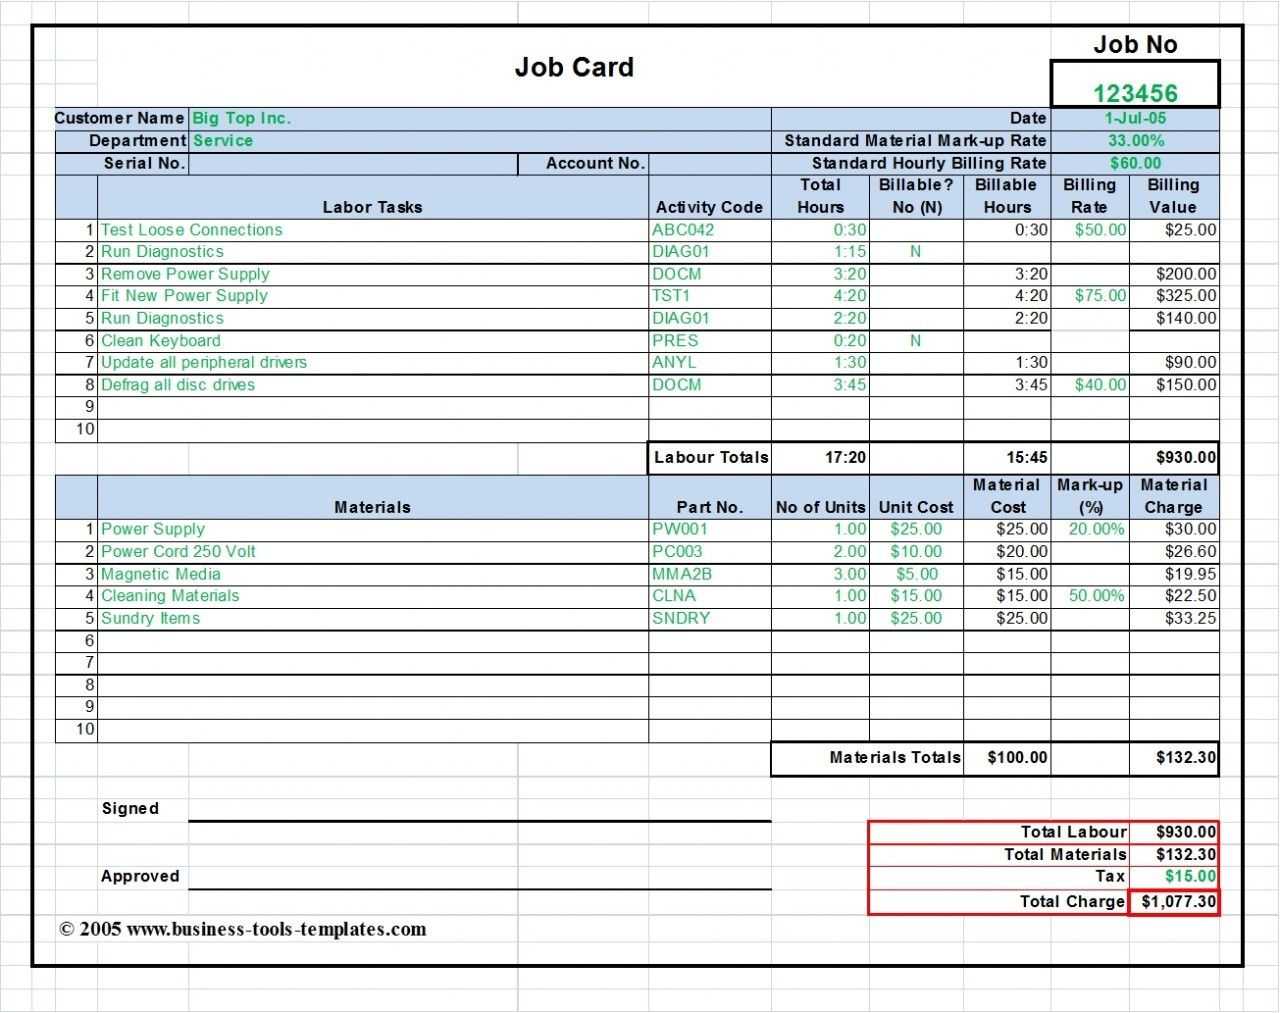 Workshop Job Card Template Excel, Labor & Material Cost With Regard To Job Card Template Mechanic